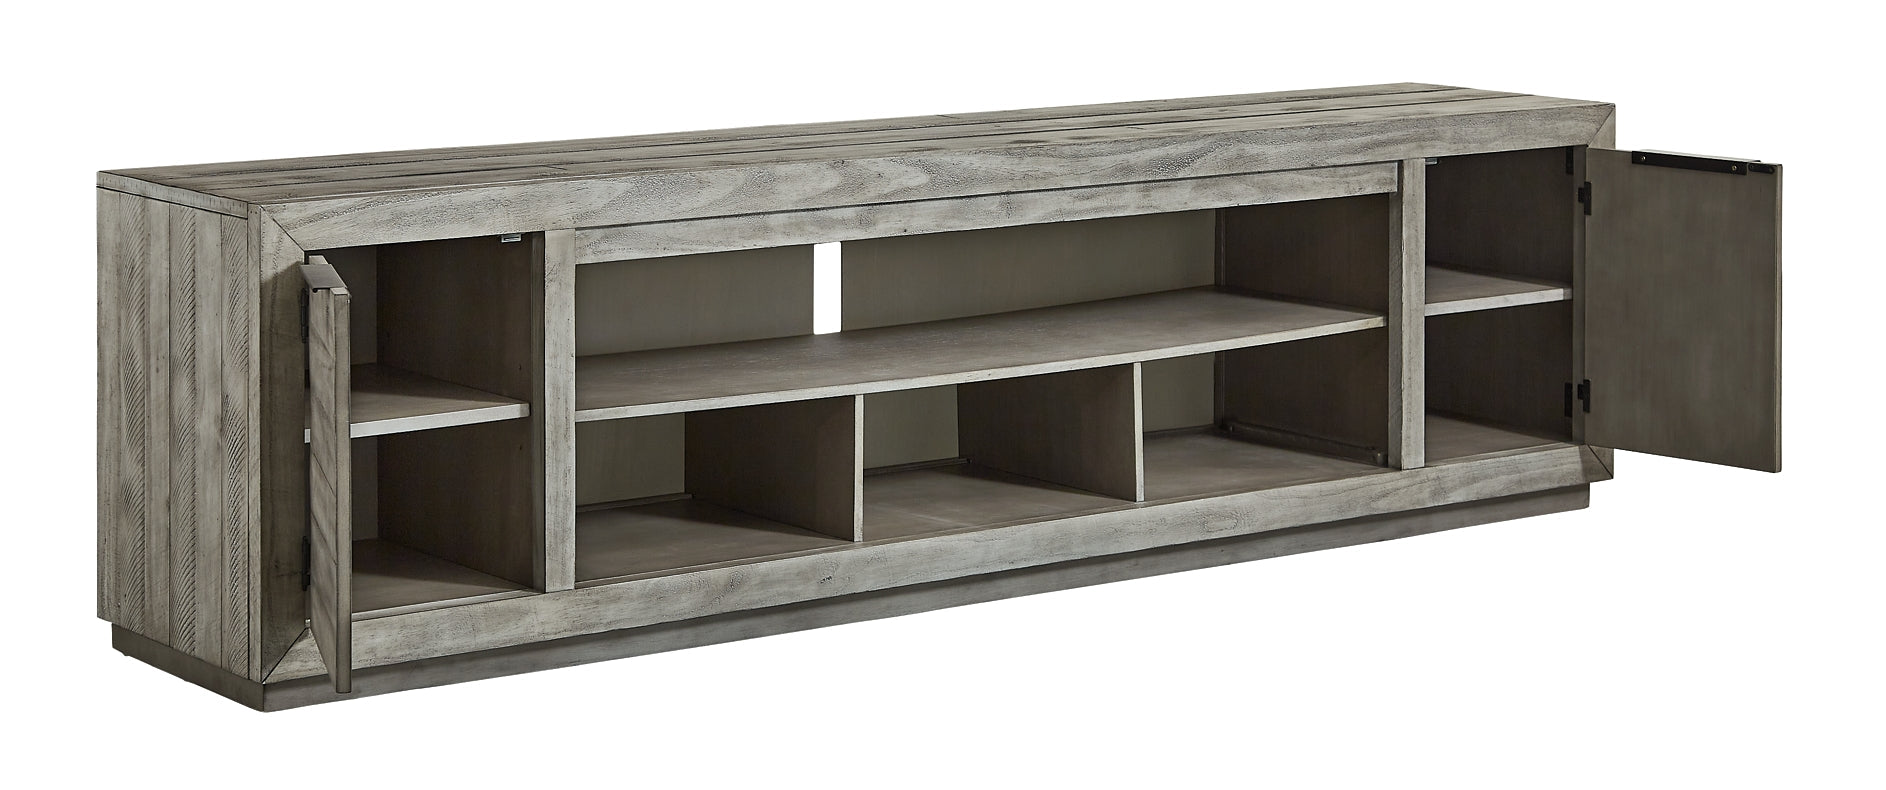 Naydell XL TV Stand